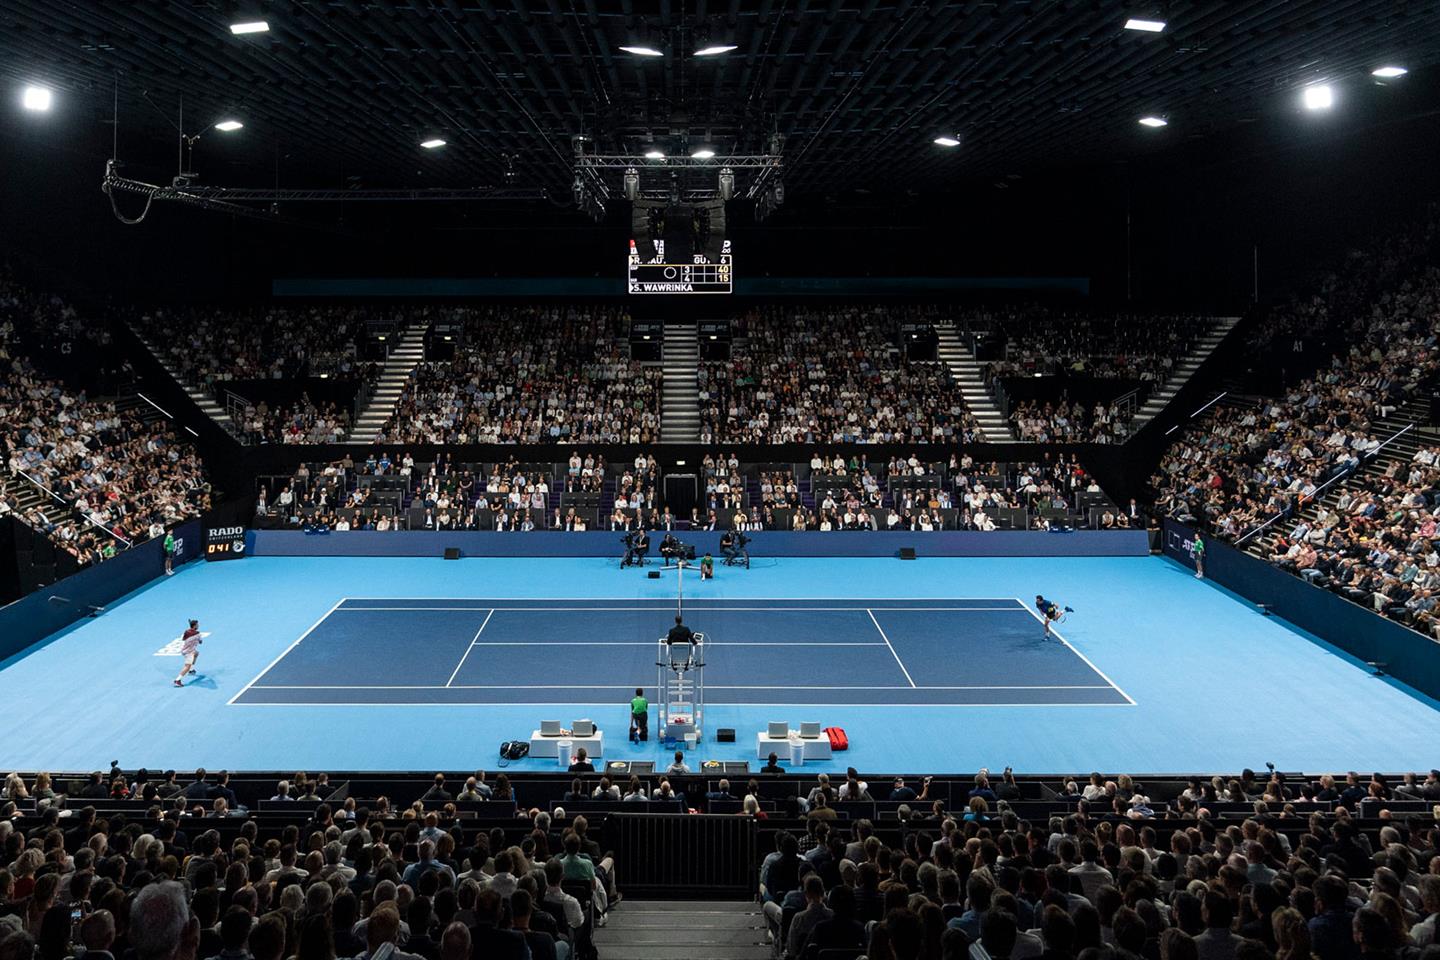 Swiss Indoors Tickets | Swiss Indoors Tennis 2022 Dates and Tickets